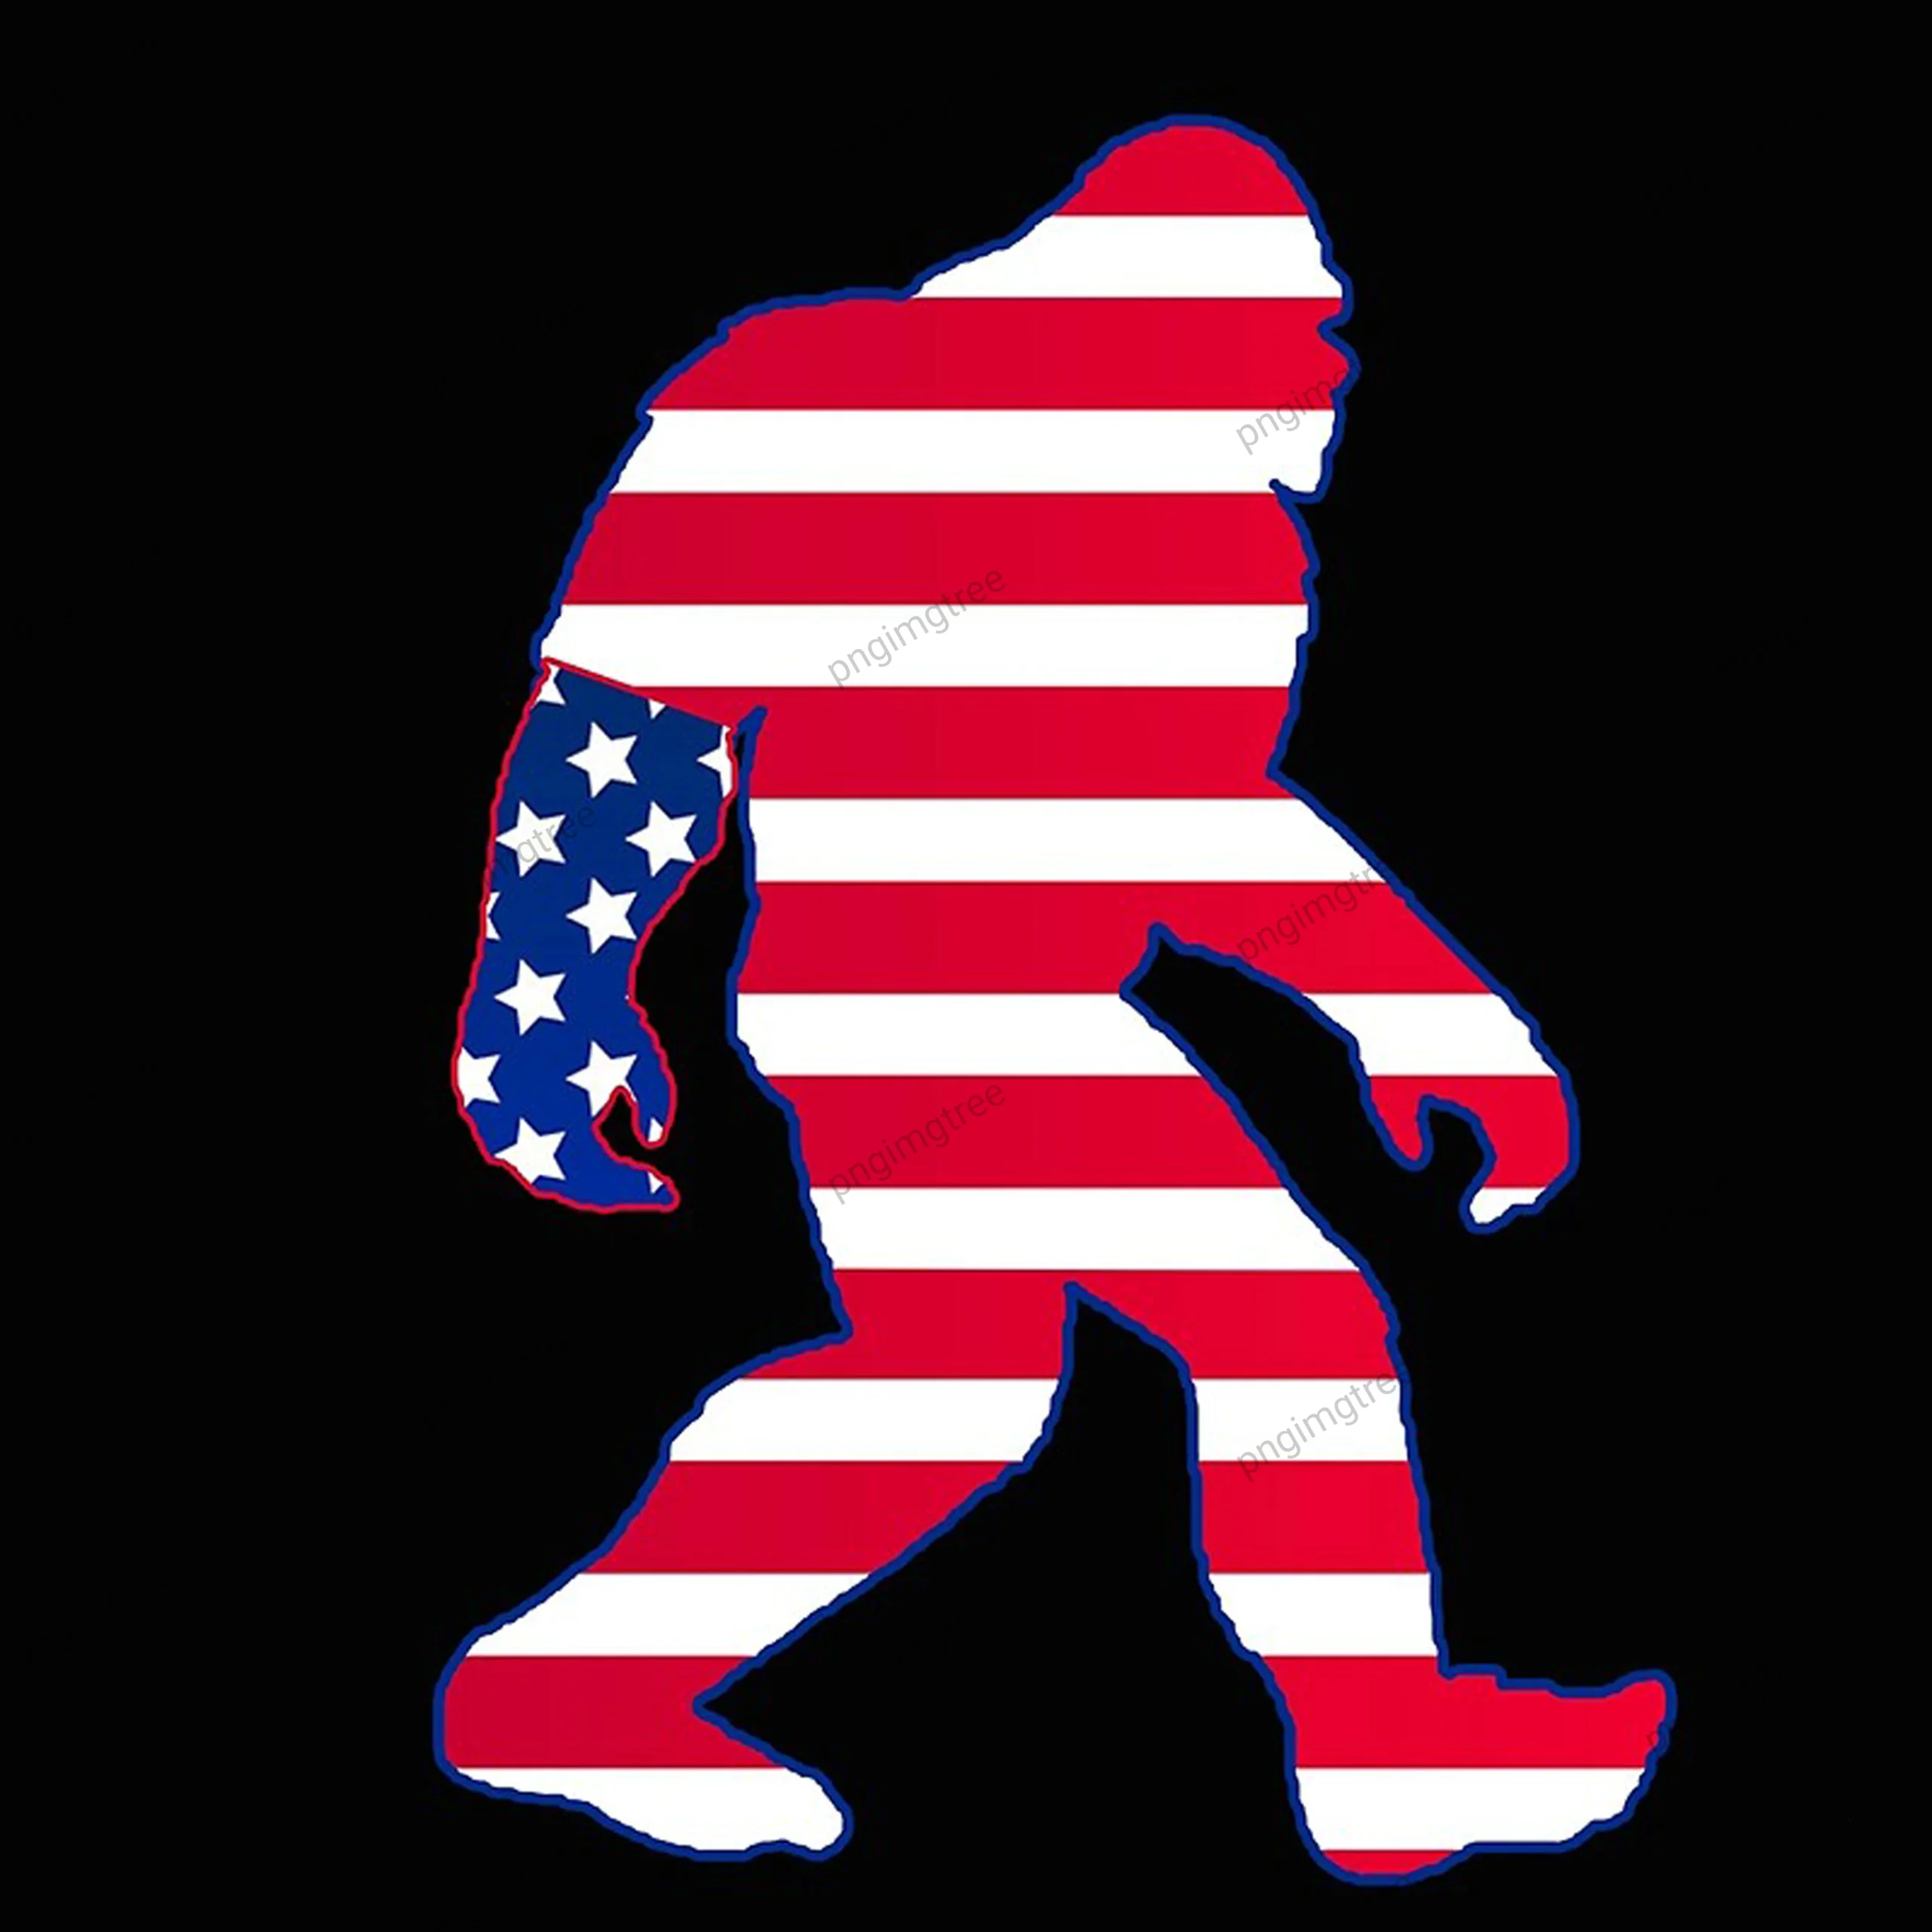 USA Bigfoot on black background shows the beauty of the design